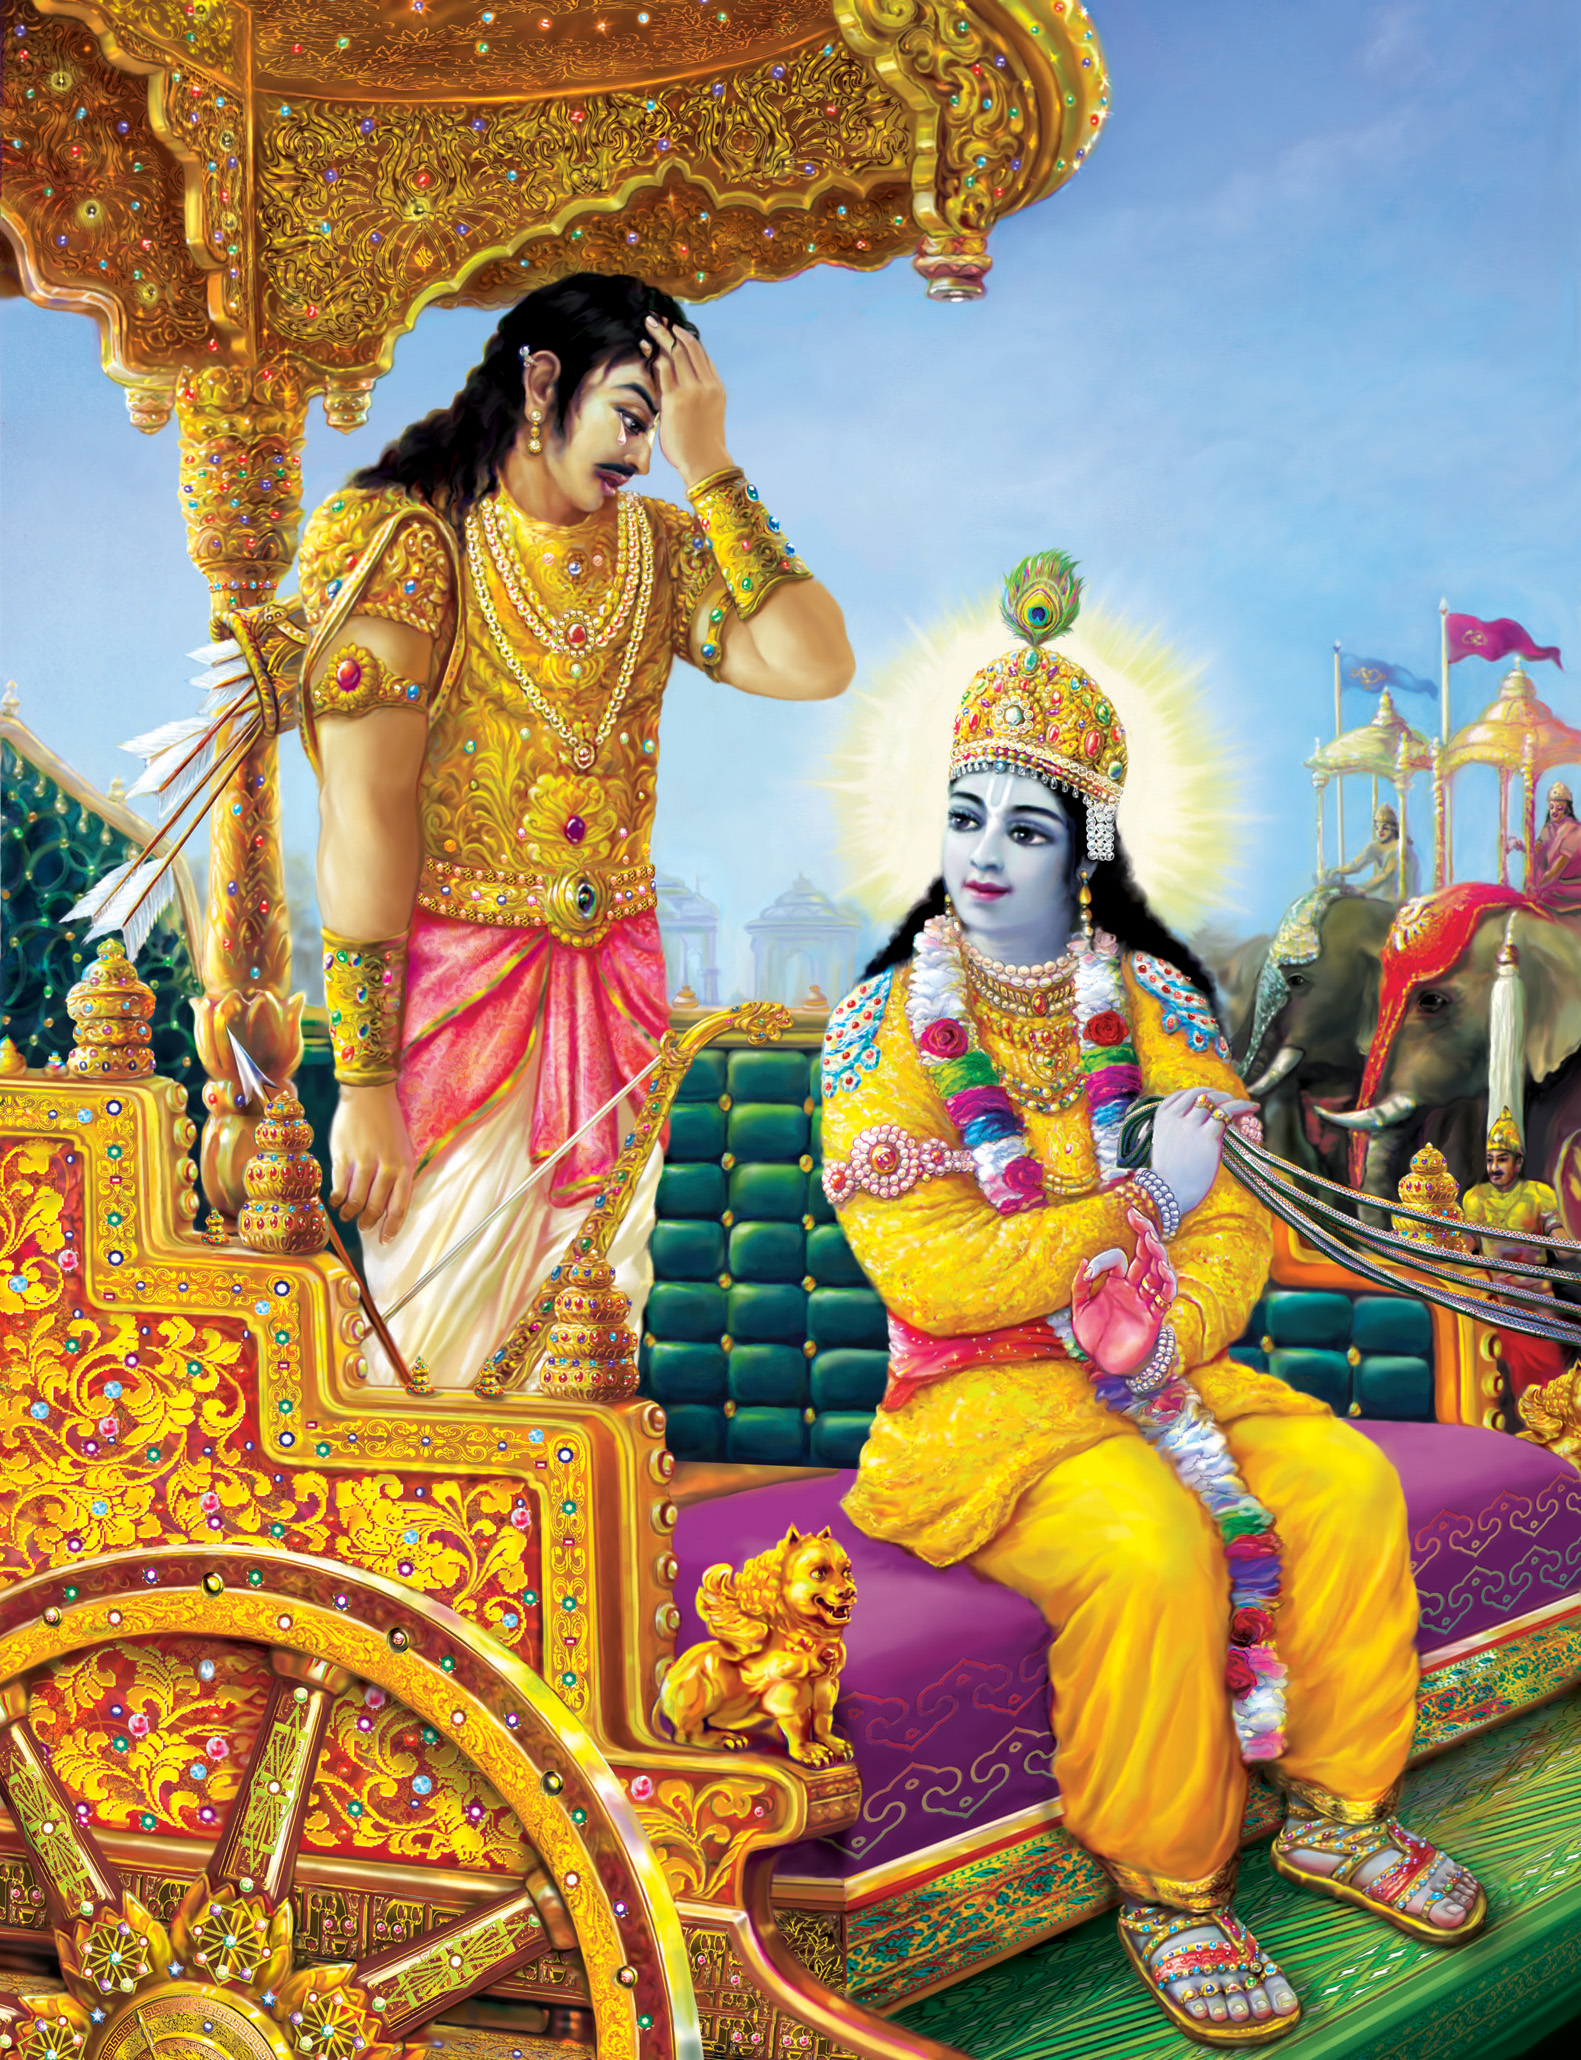 Bhagavad Gita: When Arjuna saw all different grades of friends and relatives, he became overwhelmed with compassion.